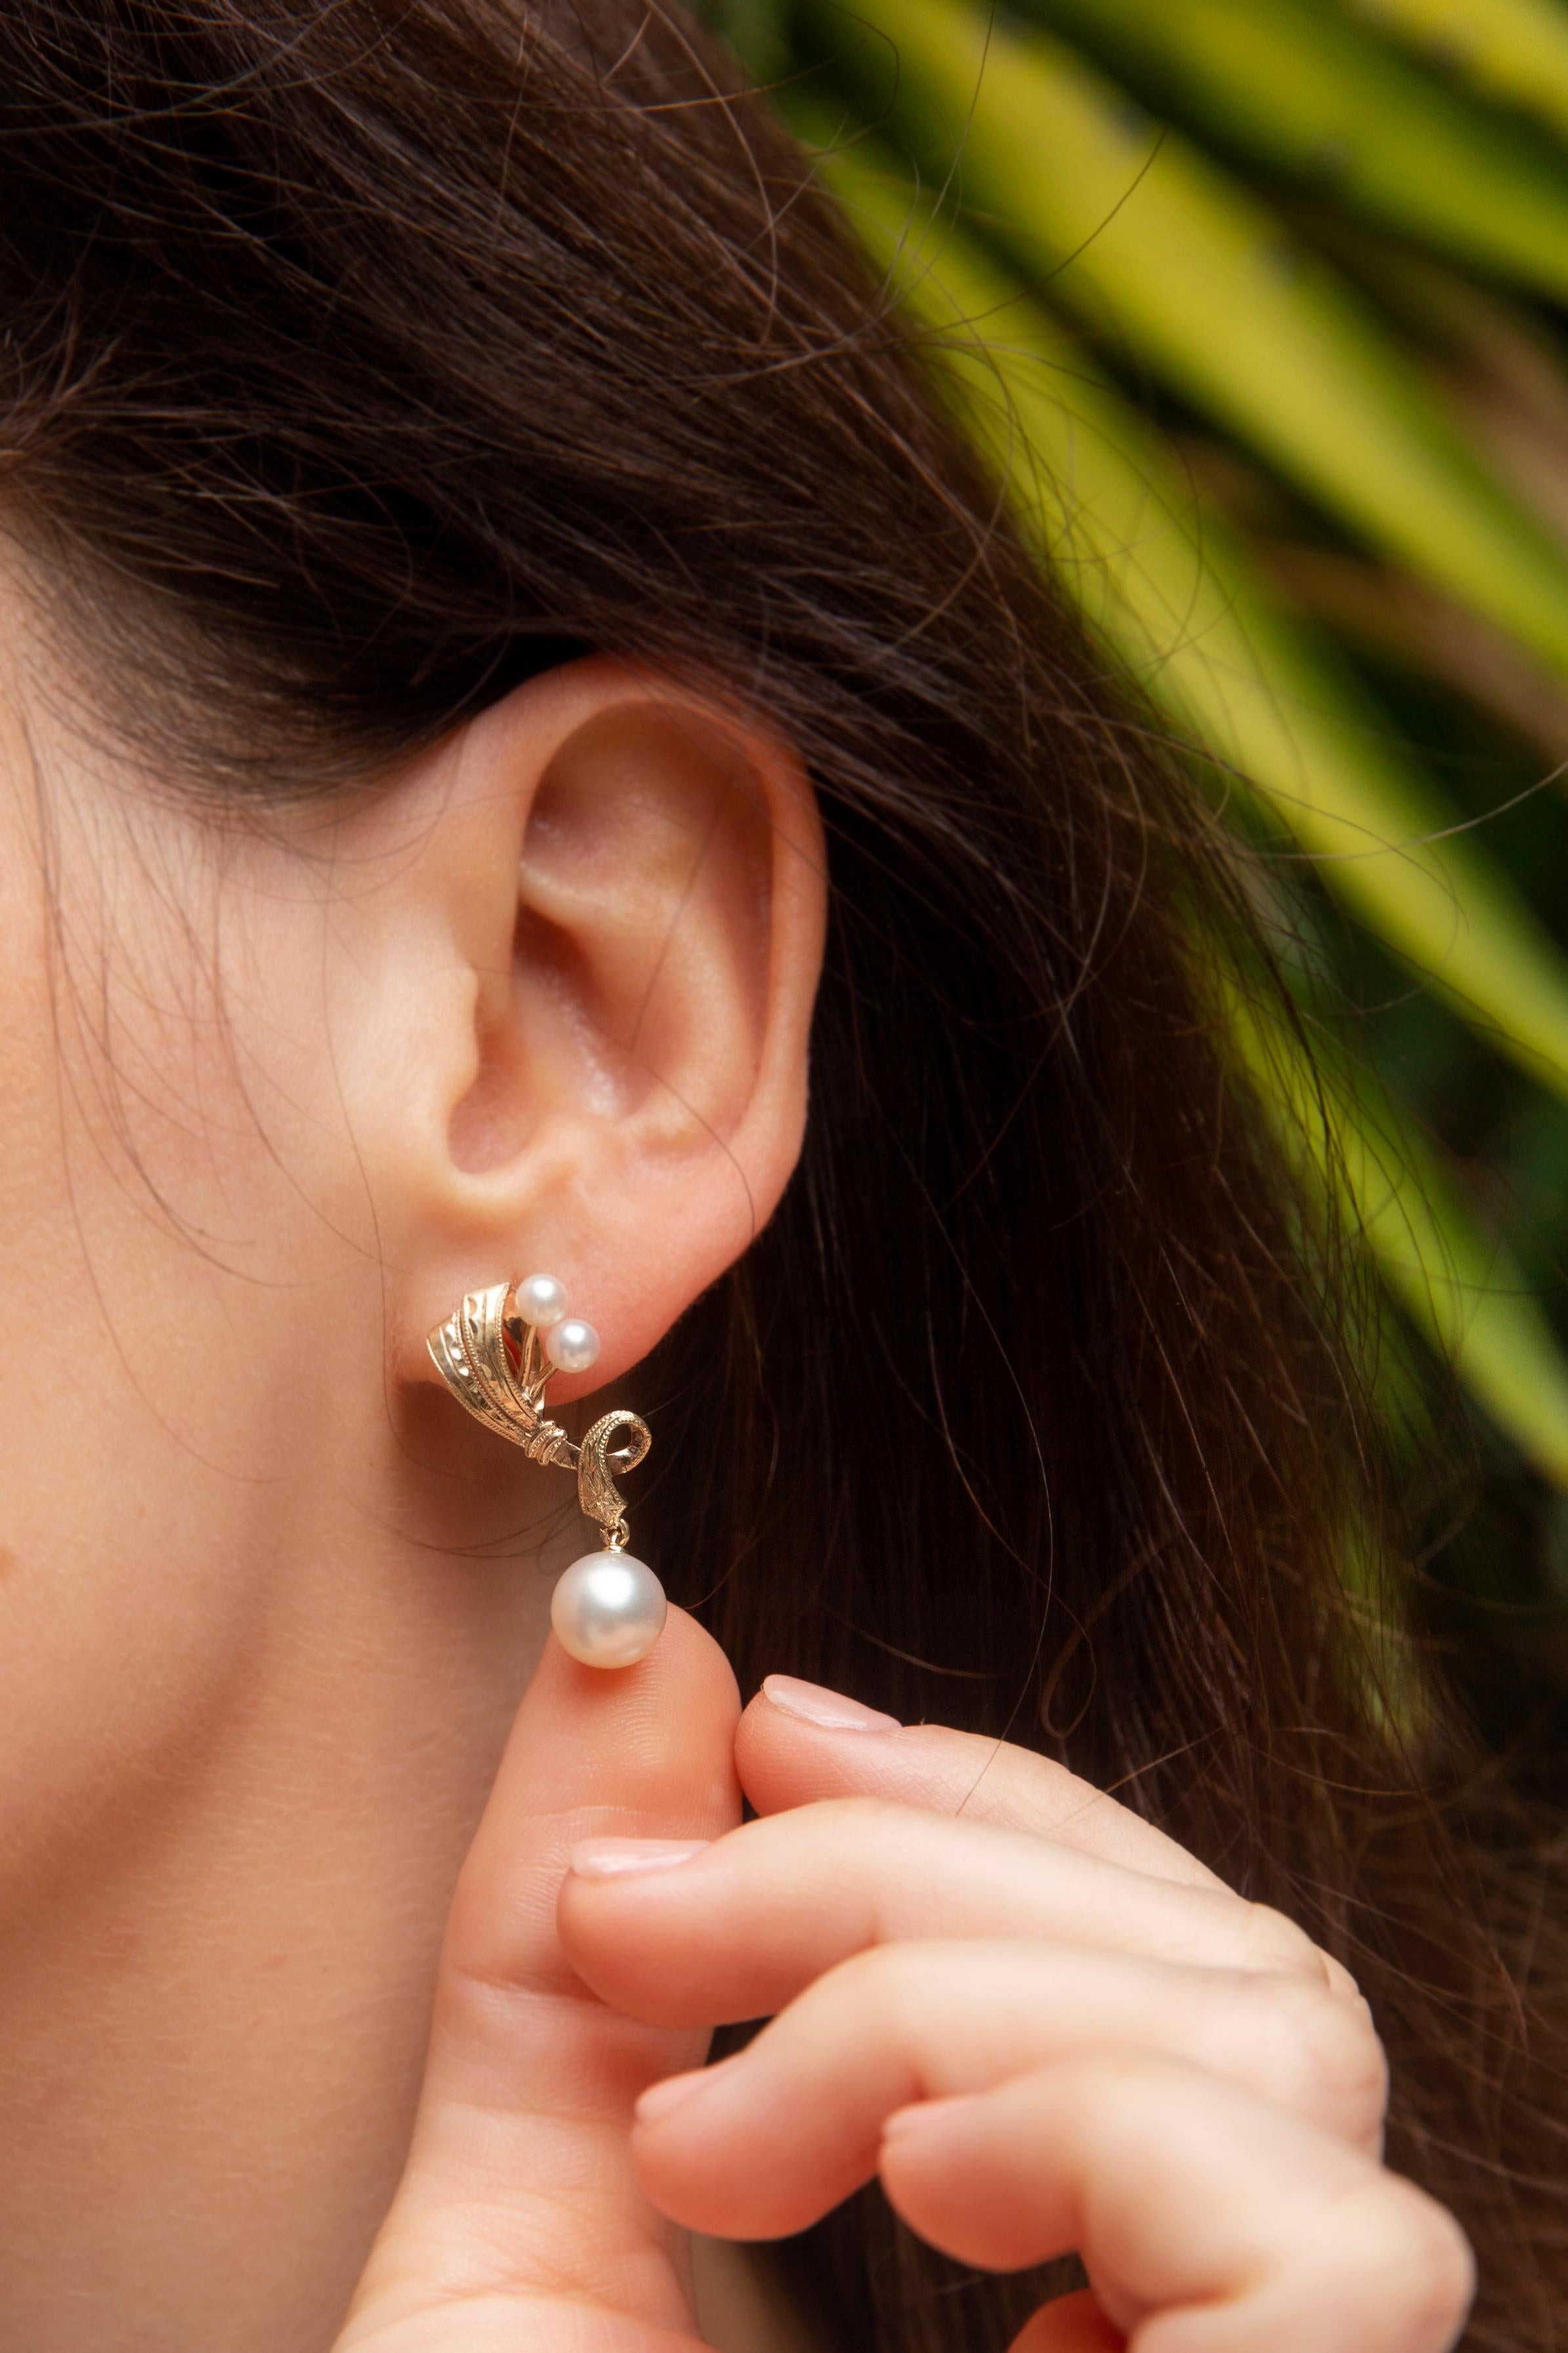 Crafted with love in 9 carat gold, these gorgeous drop earrings are each a twisting ribbon-like setting with a single white cultured pearl suspended from the bottom and a duo of smaller pearls near the top. They have been named The Lucia Earrings.